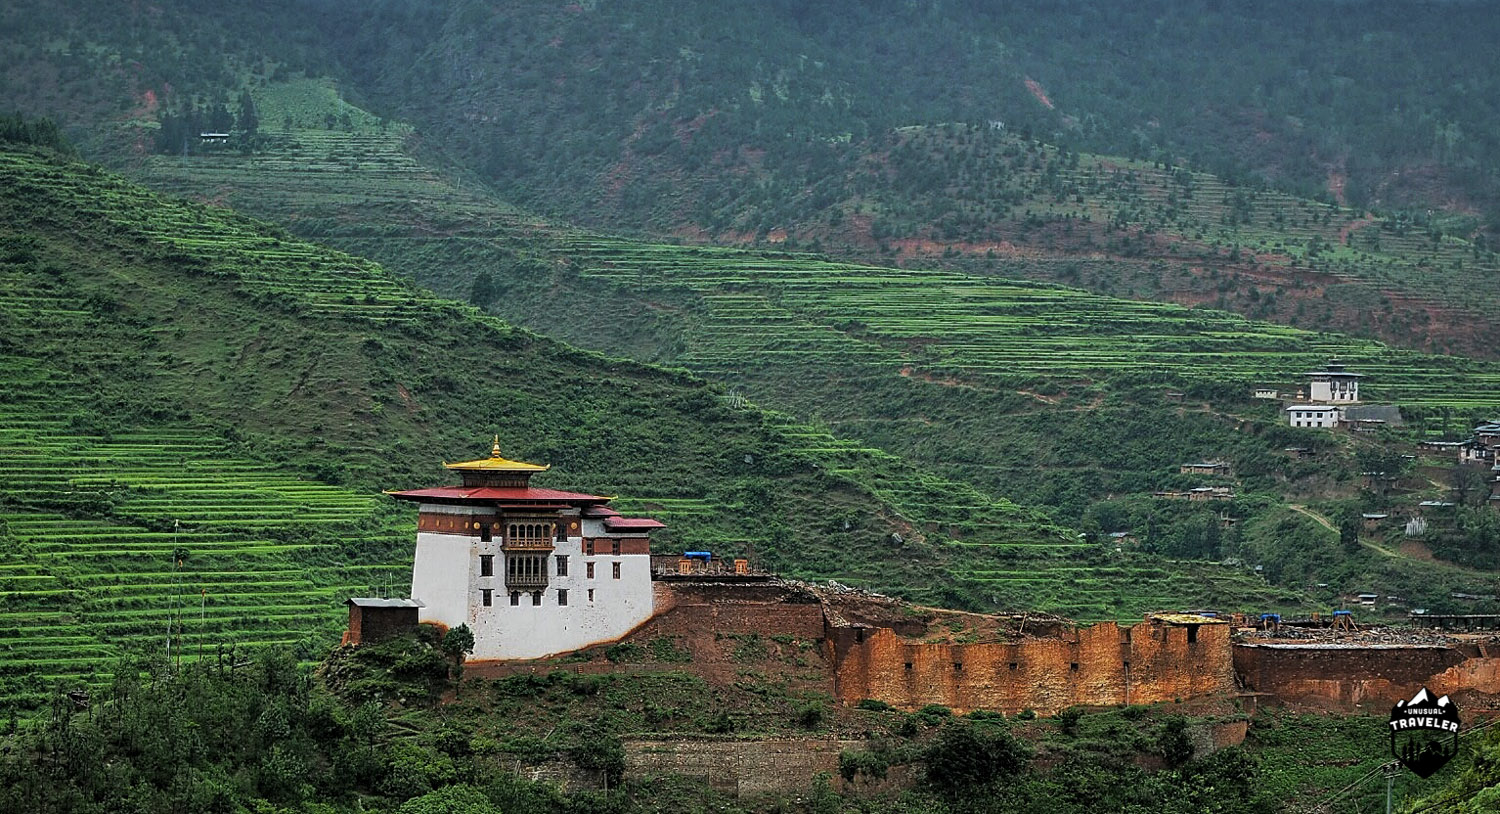 There´s 20 Dzongs around the country, here the remains of Wangdue Phodrang Dzong in western Bhutan.